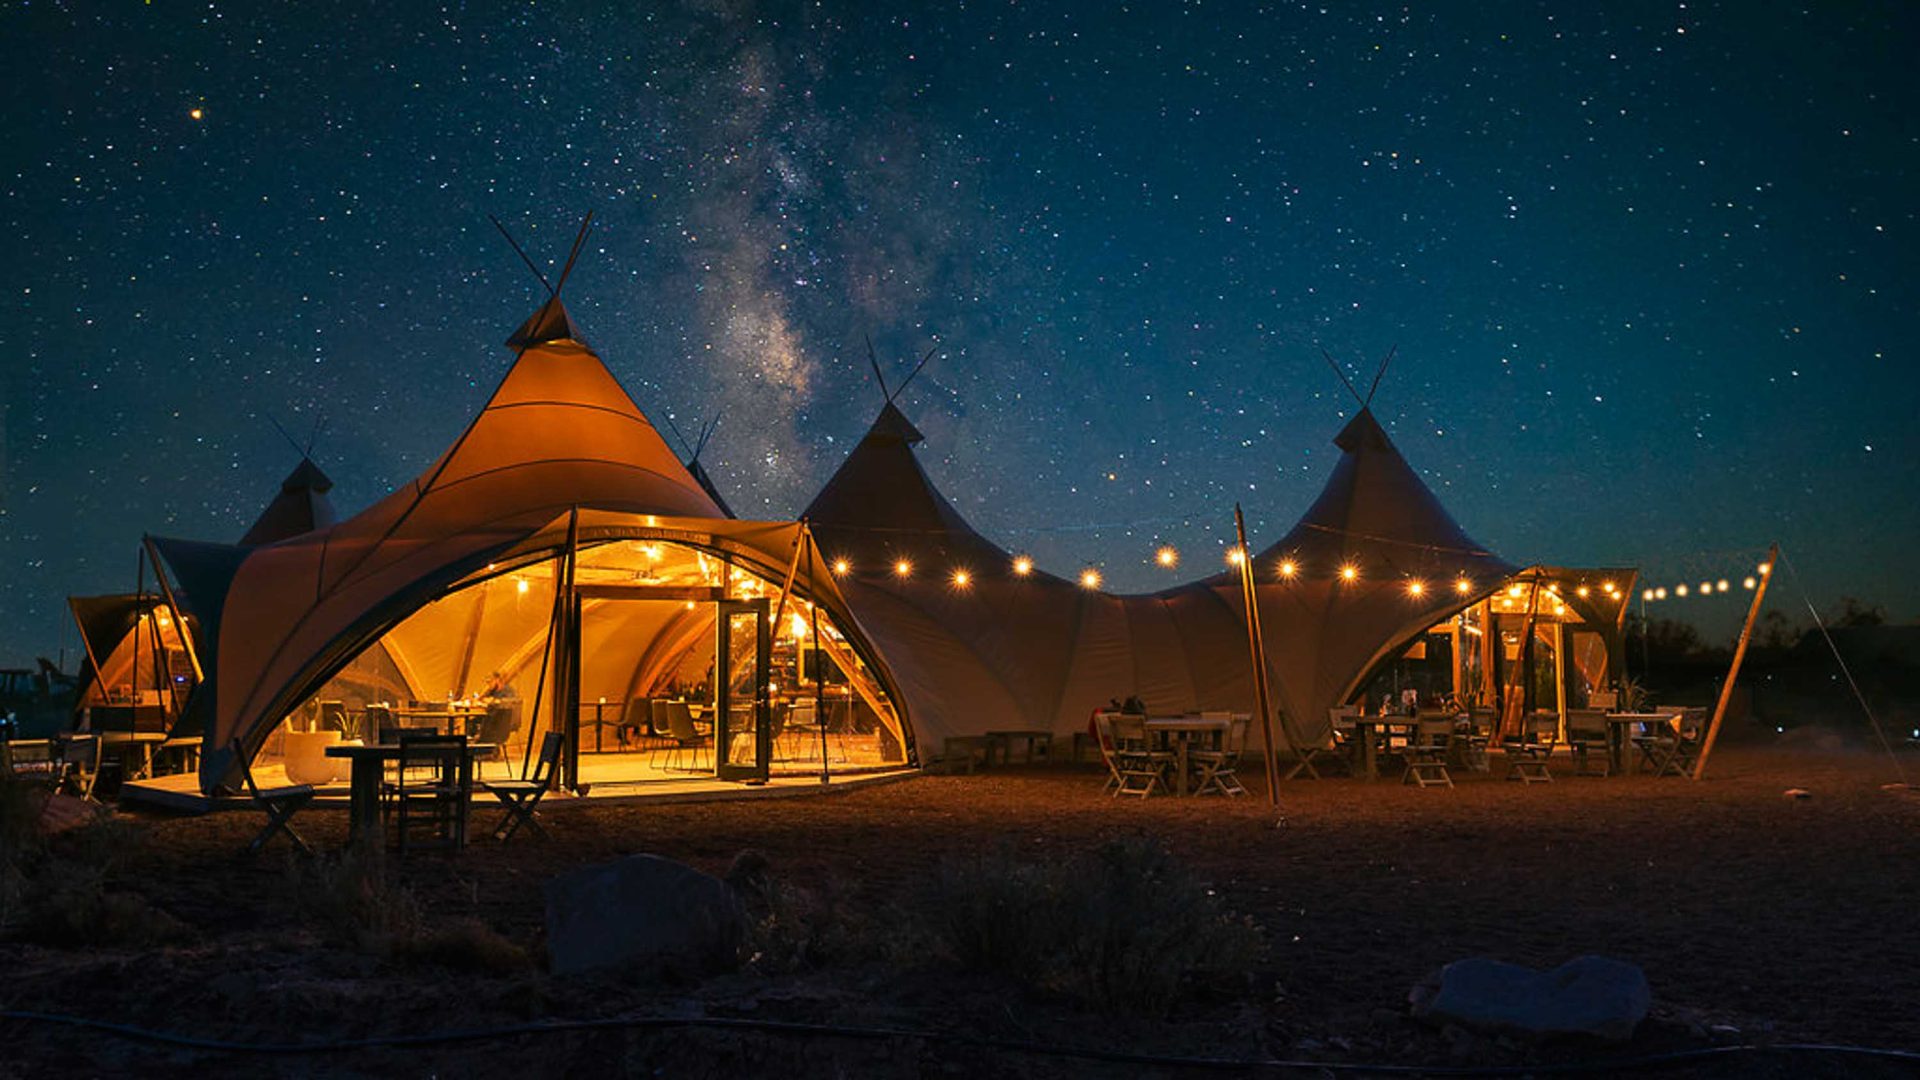 Want guaranteed sightings of the Milky Way from your hotel? Say hello to DarkSky Lodging